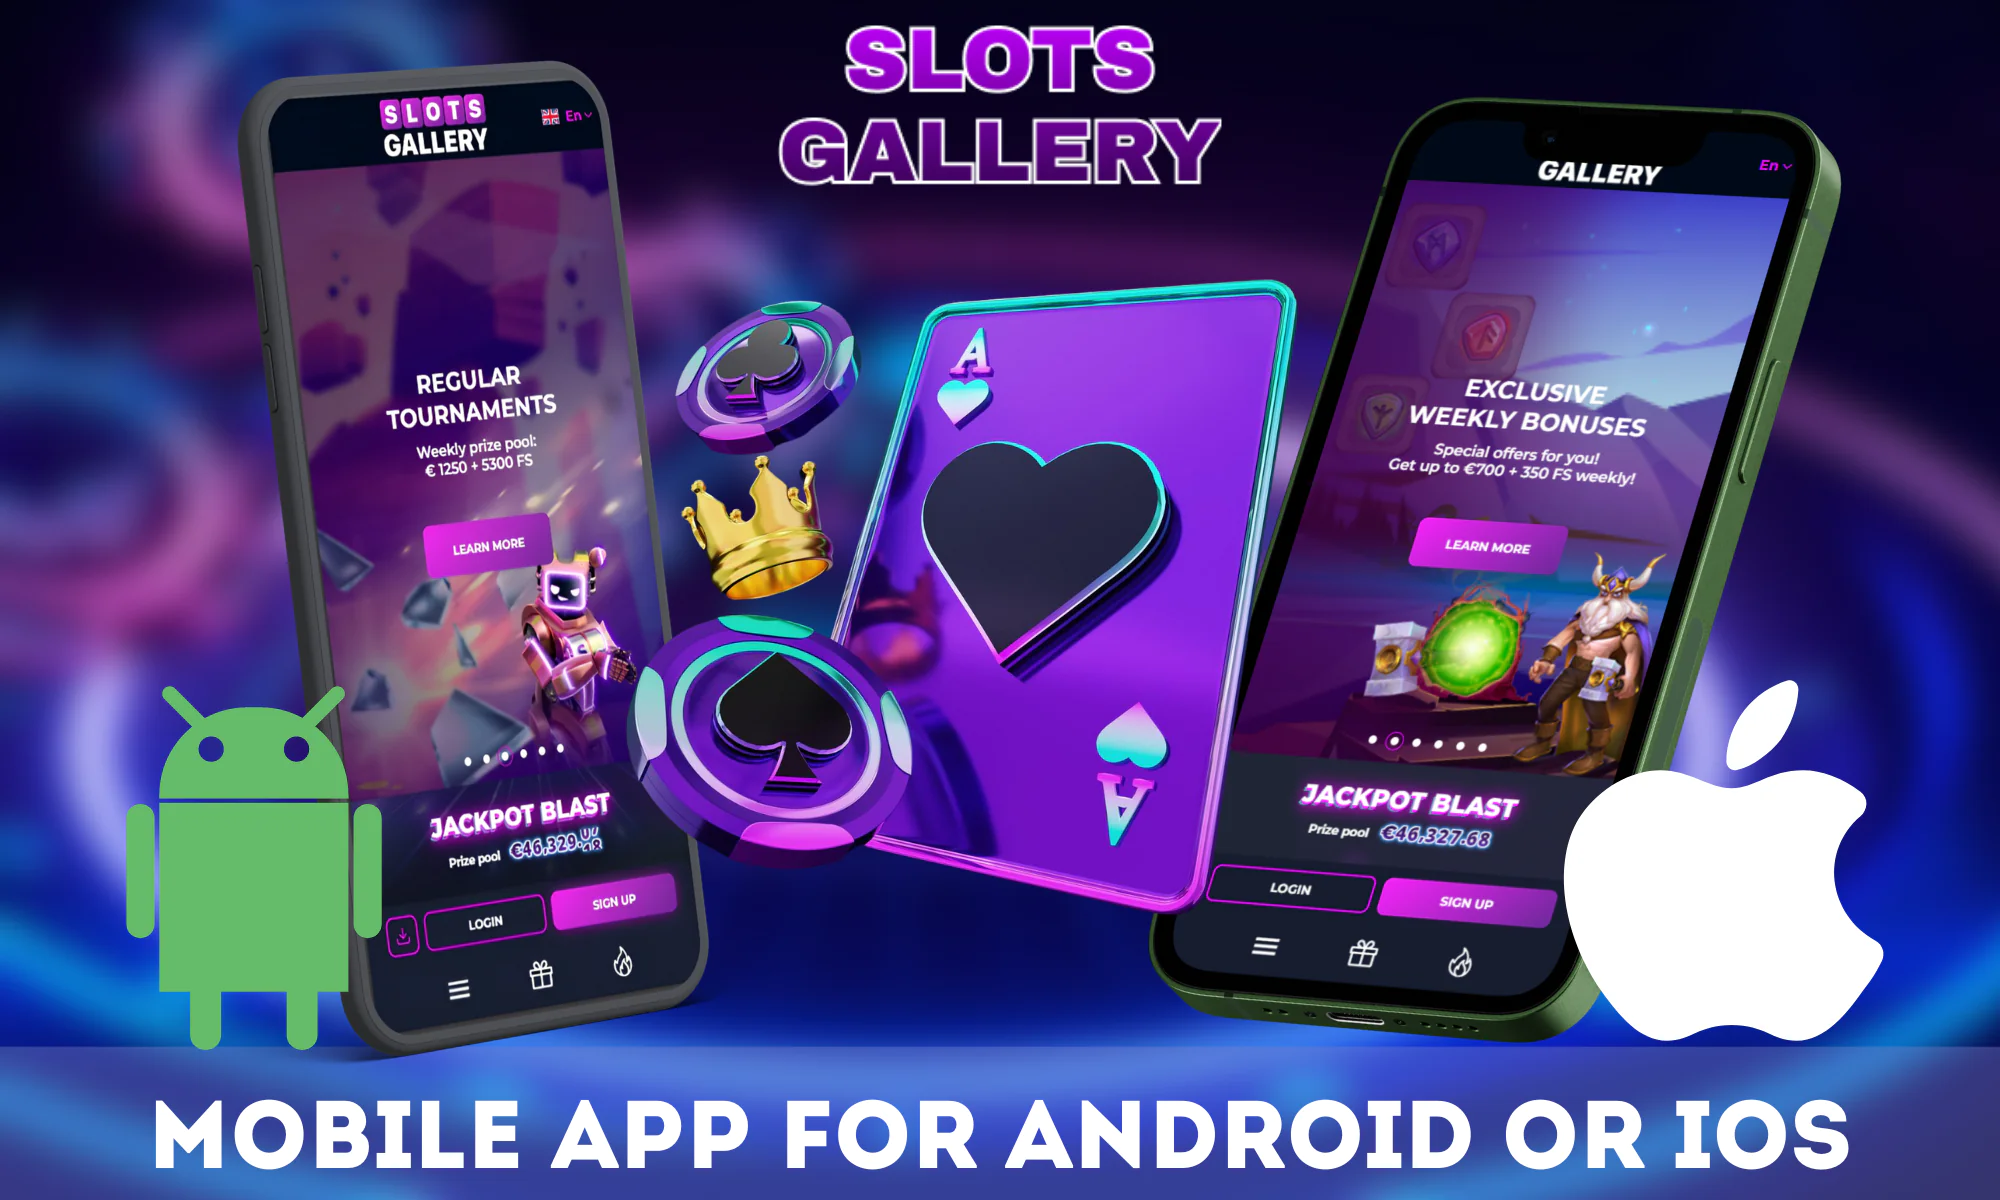 Slots Gallery Casino offers a mobile app for Android and IOS for players from New Zealand